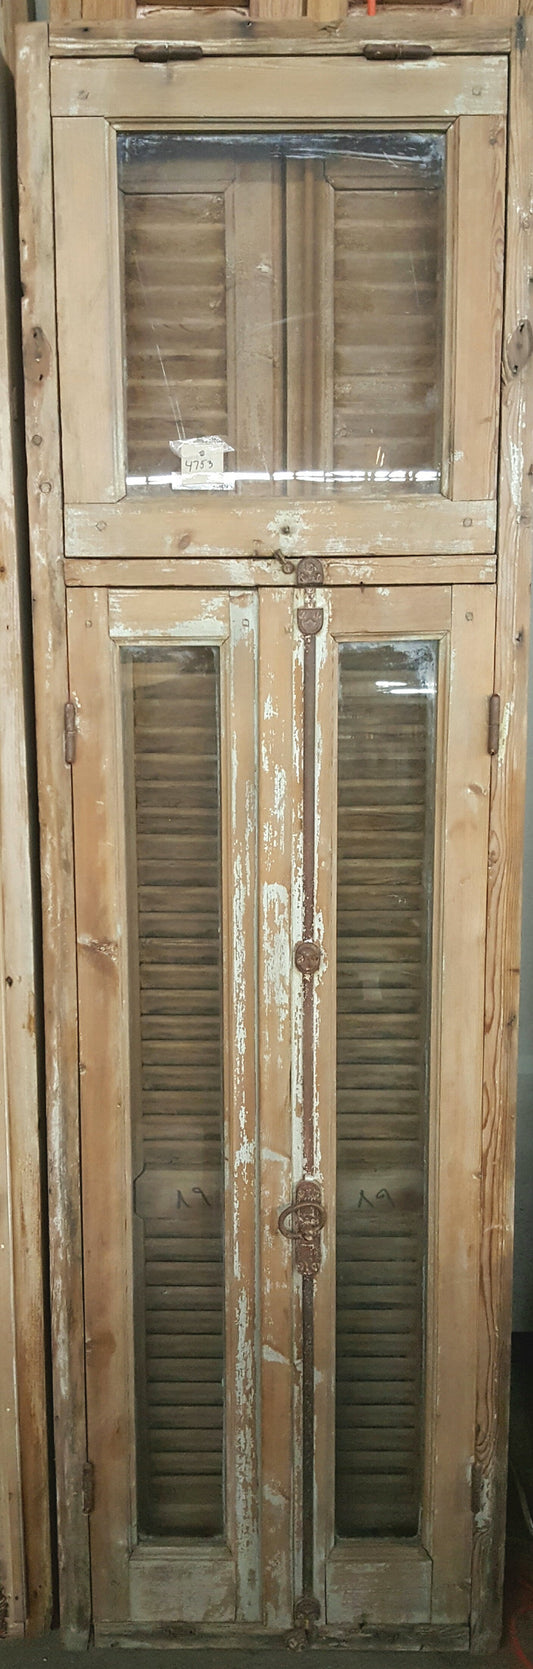 Rectangle Single Pane Window with Transom and Shutter Set